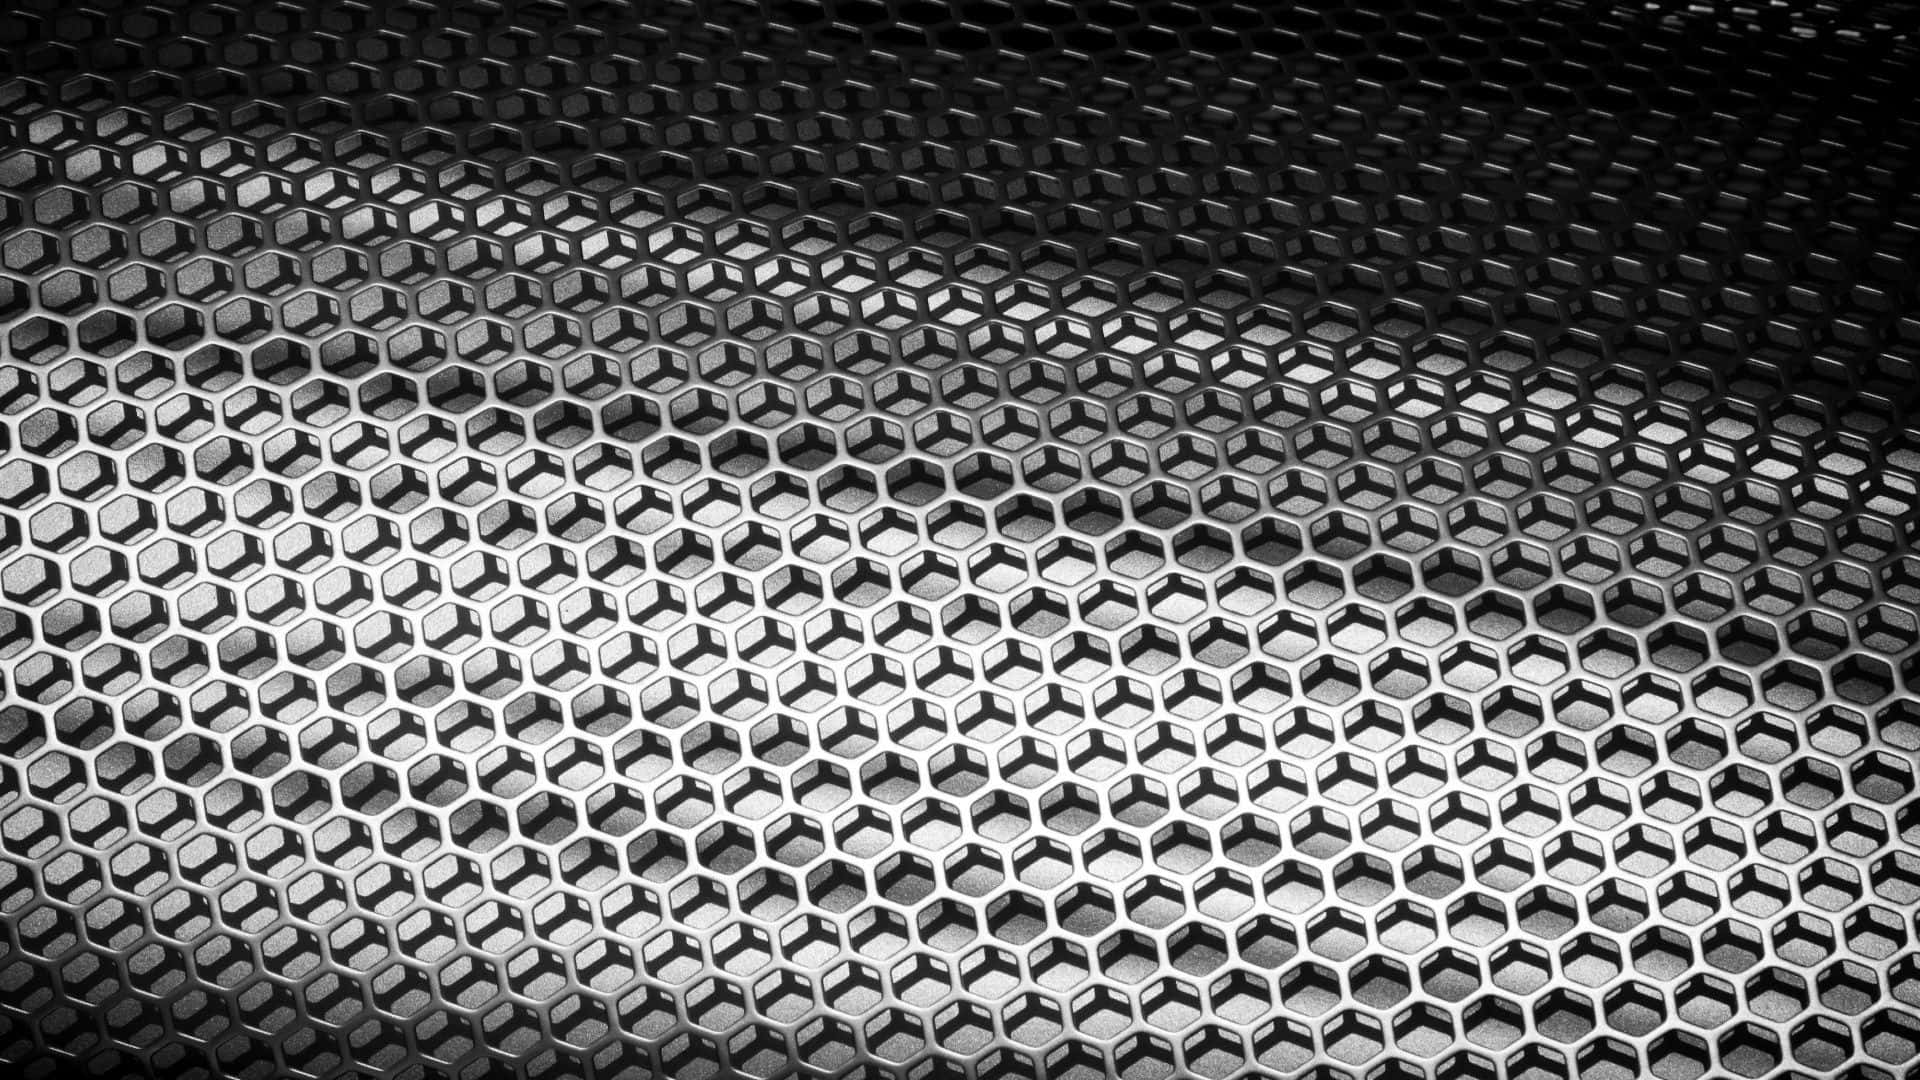 A Black And White Photo Of A Metal Mesh